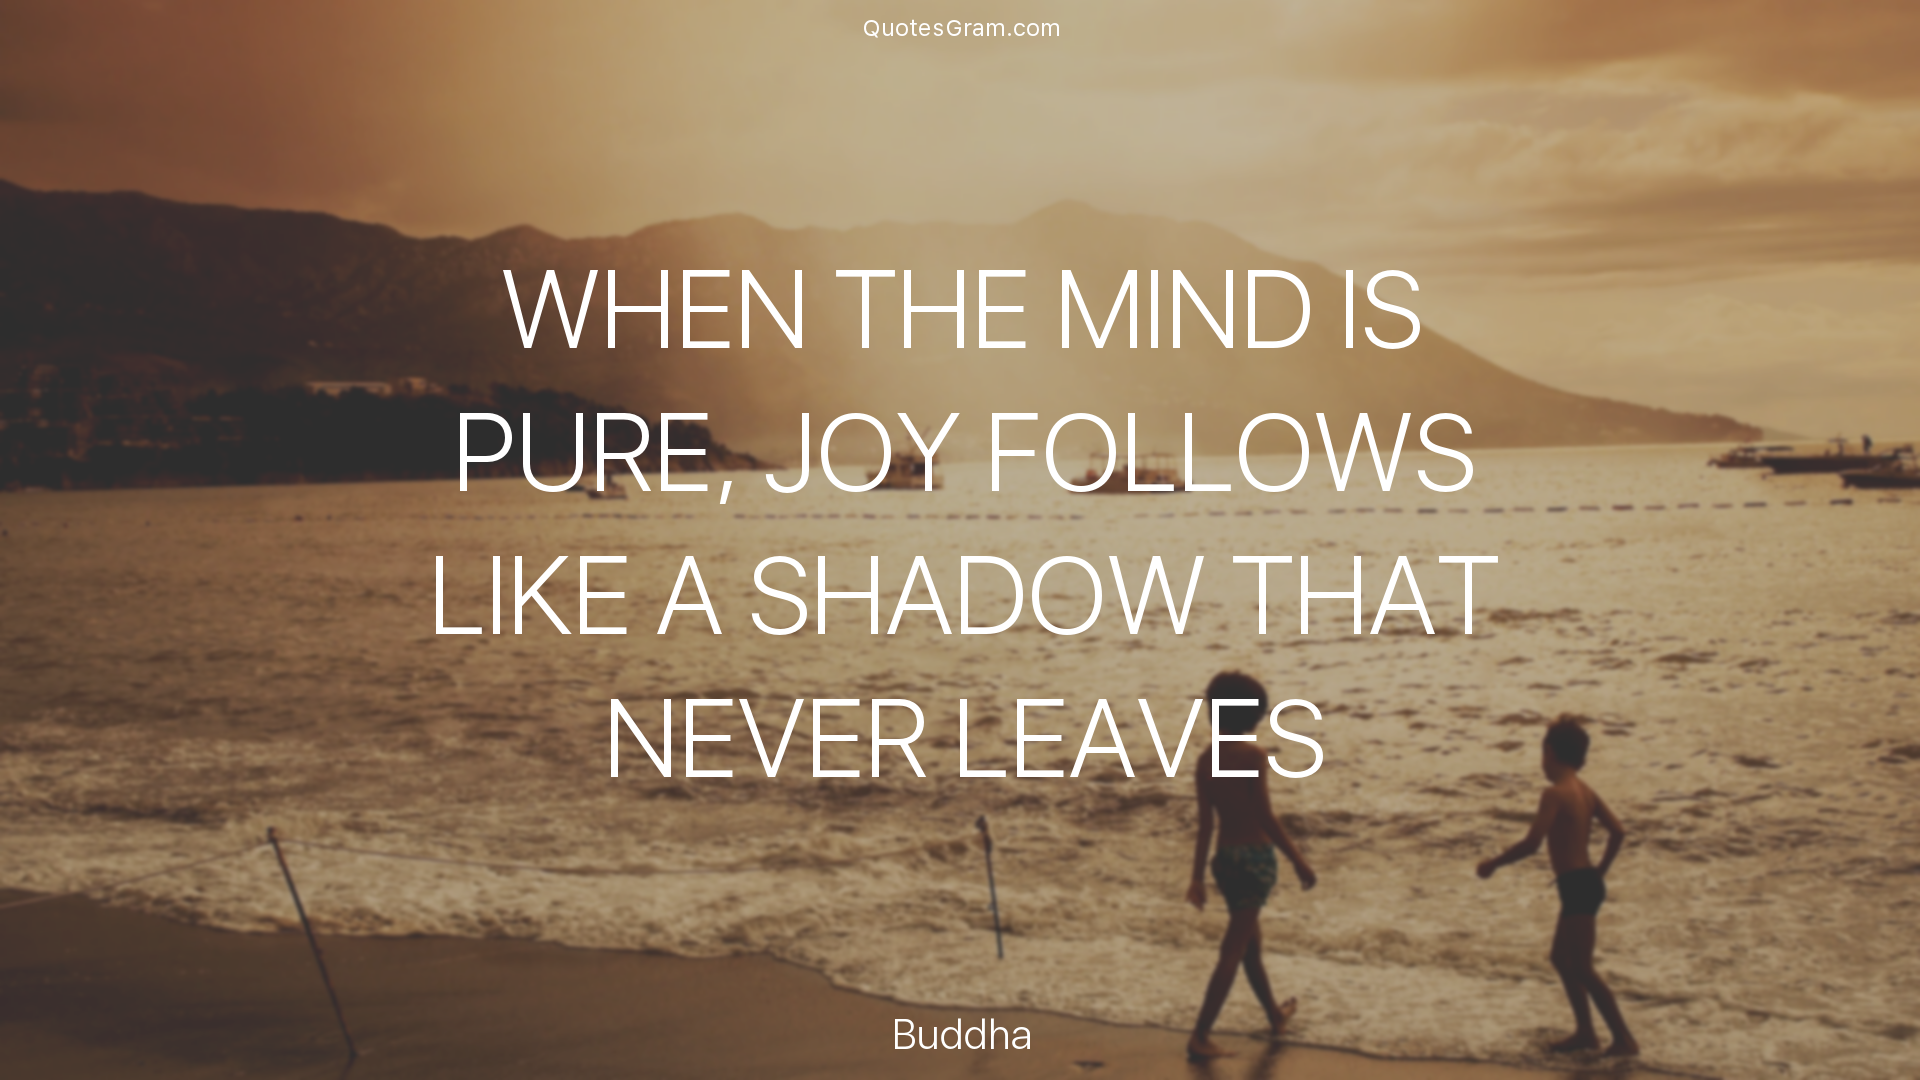 buddha-quote-when-the-mind-is-pure-joy-follows-like-a-shadow.png